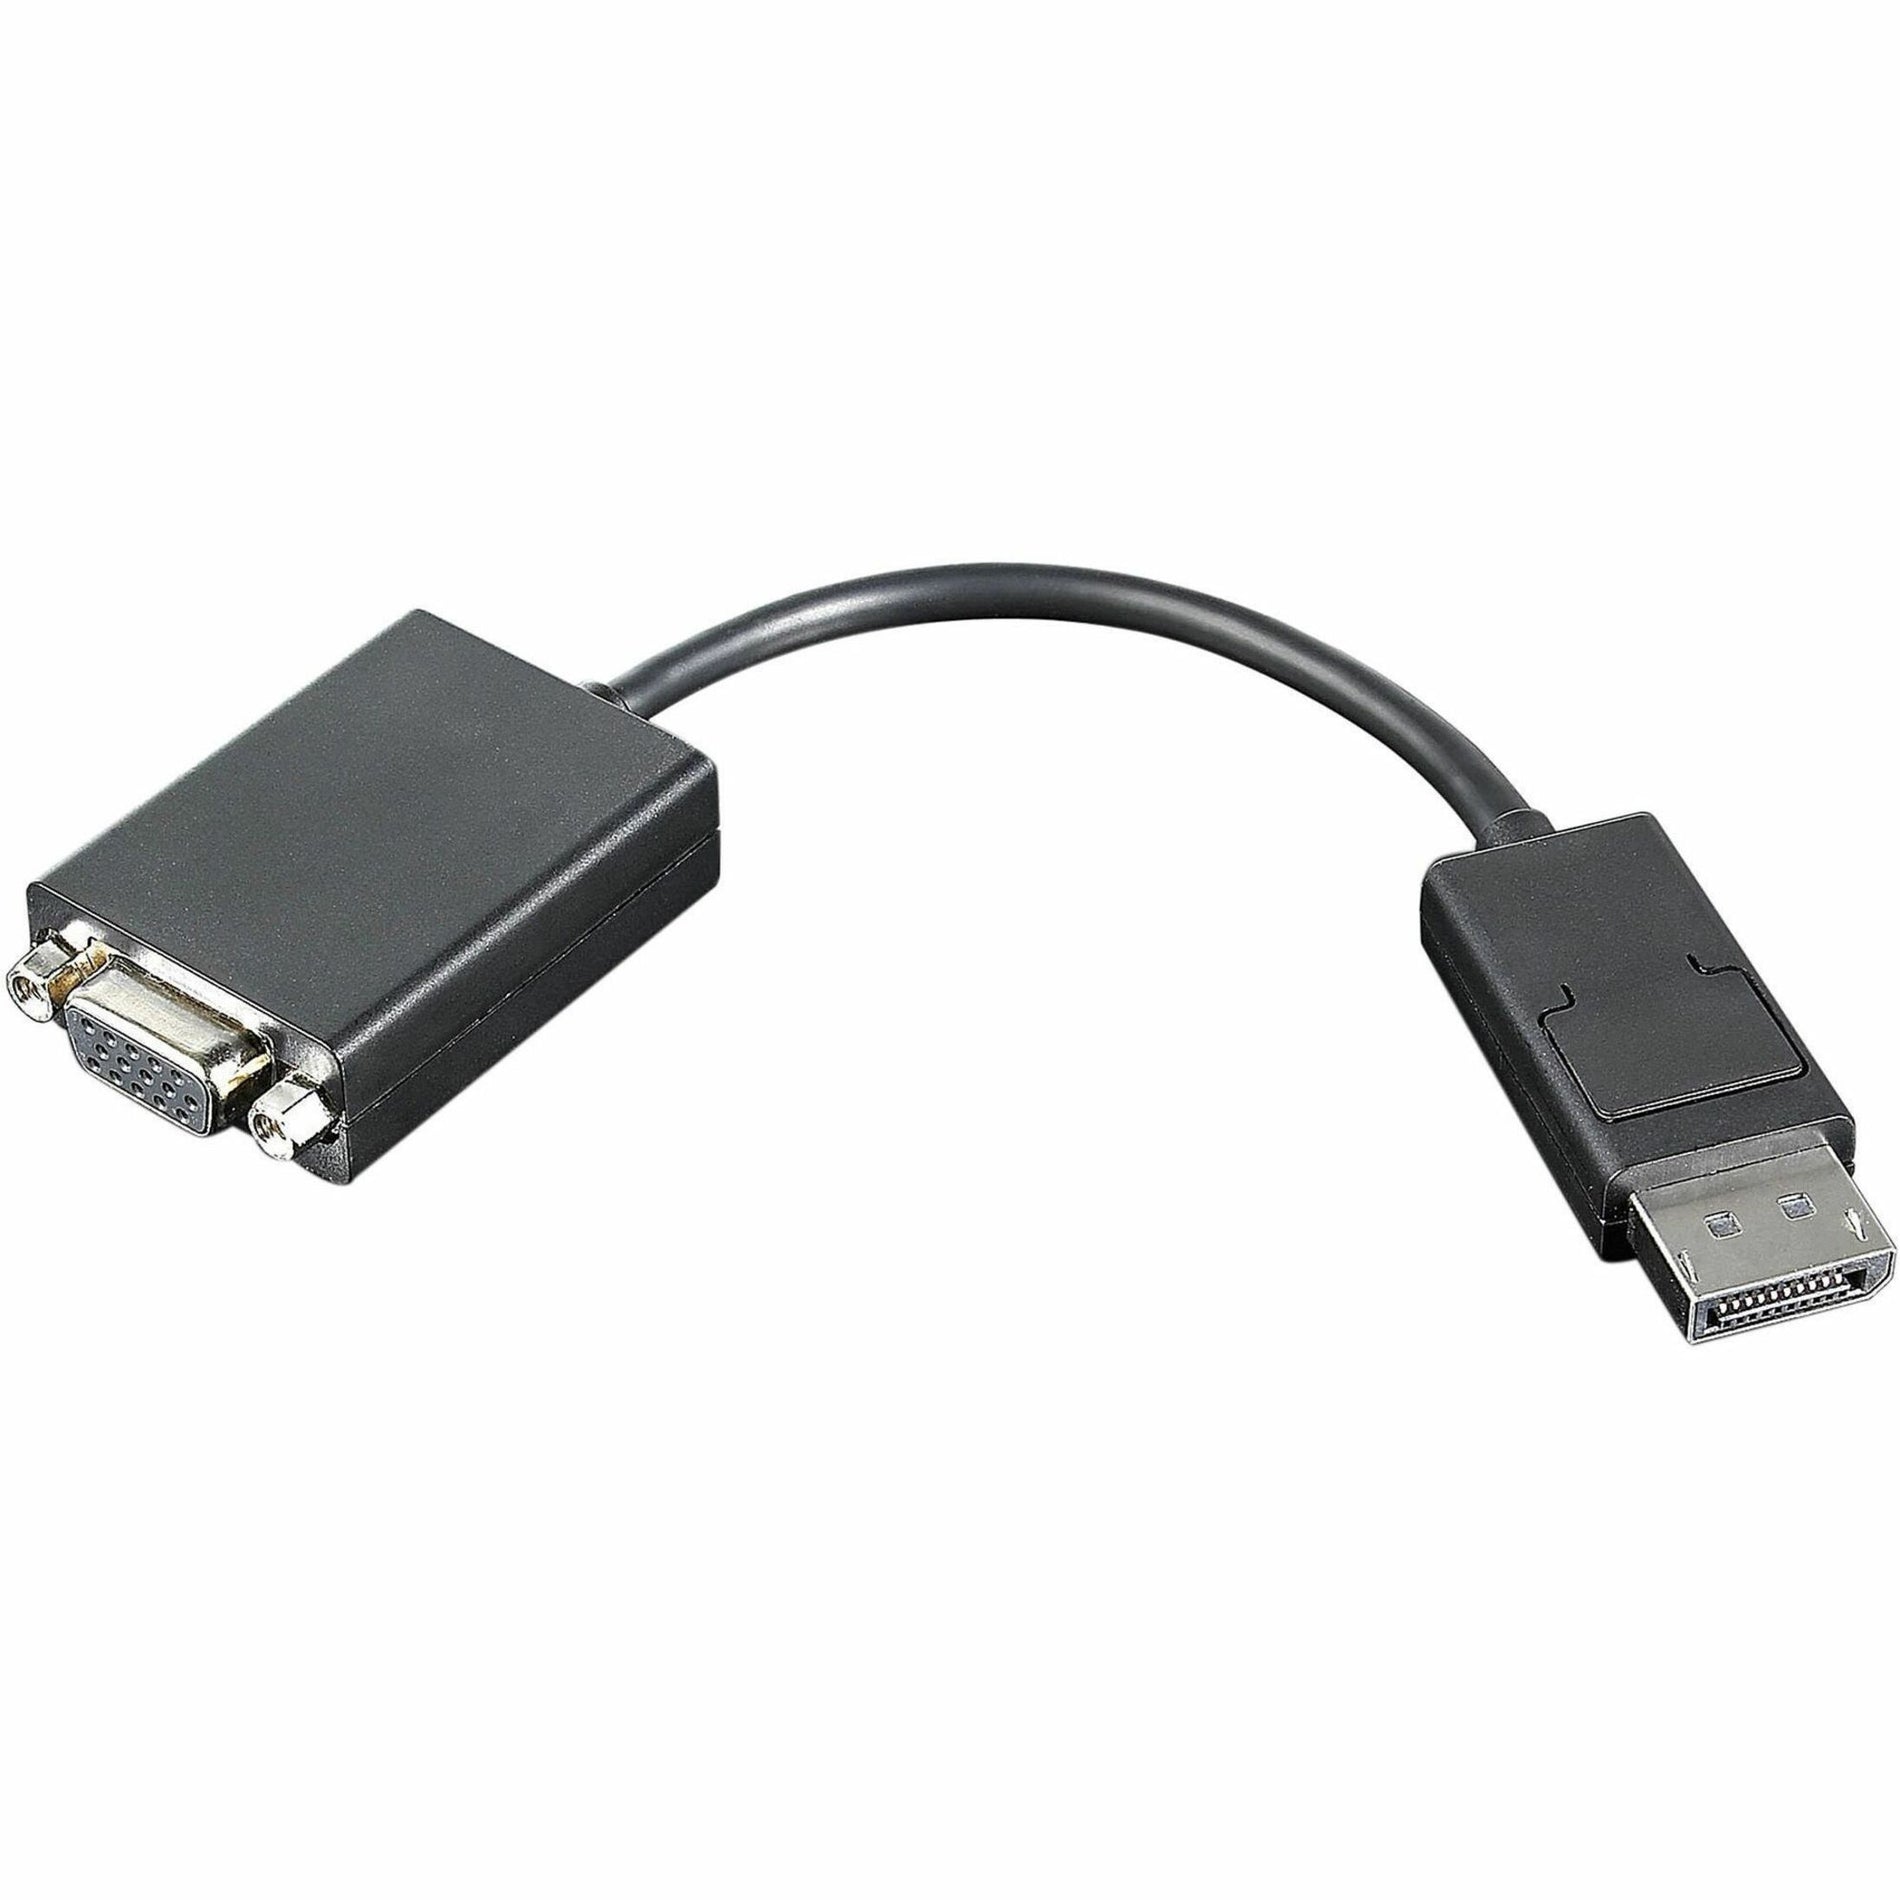 Lenovo VGA Video Cable - High-Quality Video Transmission [Discontinued]